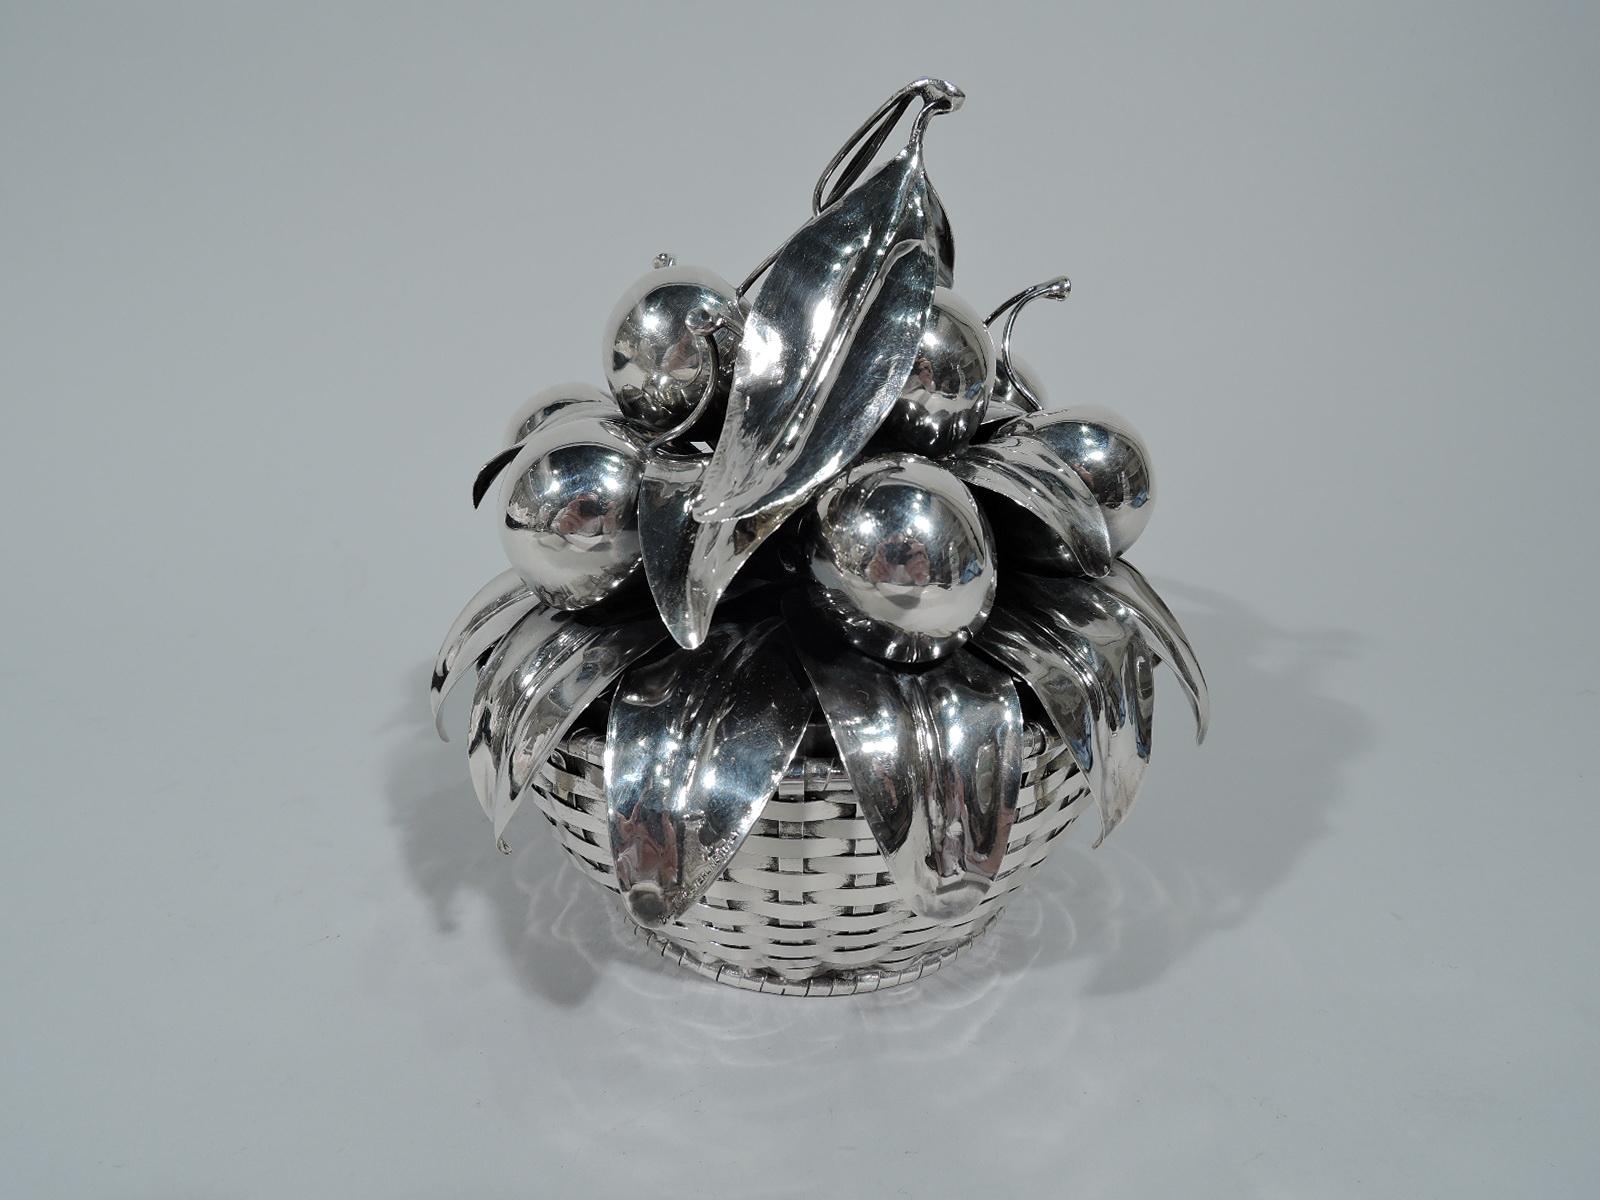 Sweet sterling silver basket. Made by Buccellati in Milan. Solid well and curved woven sides. Cover in form of overlapping leaves mounted to open circular frame with more leaves and cherries heaped on top. Succulent fruit with leafy stems. Post-1967